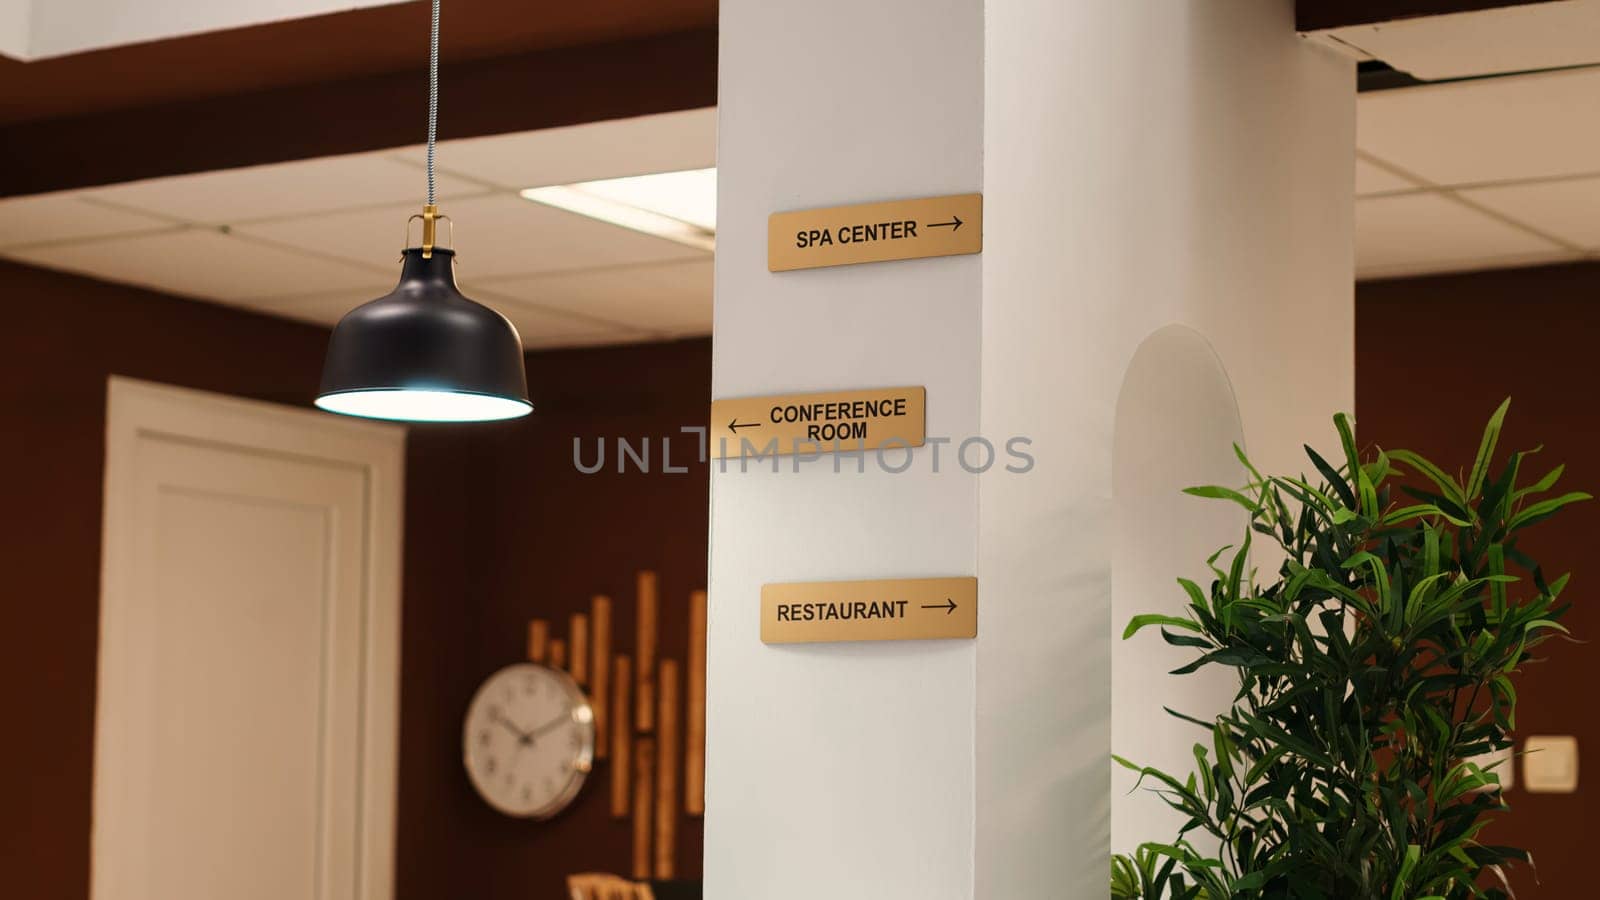 Empty stylish business accommodation lobby interior with deluxe spa center, conference room, and restaurant amenities. Close up of hotel facilities plaque signs on resort foyer wall